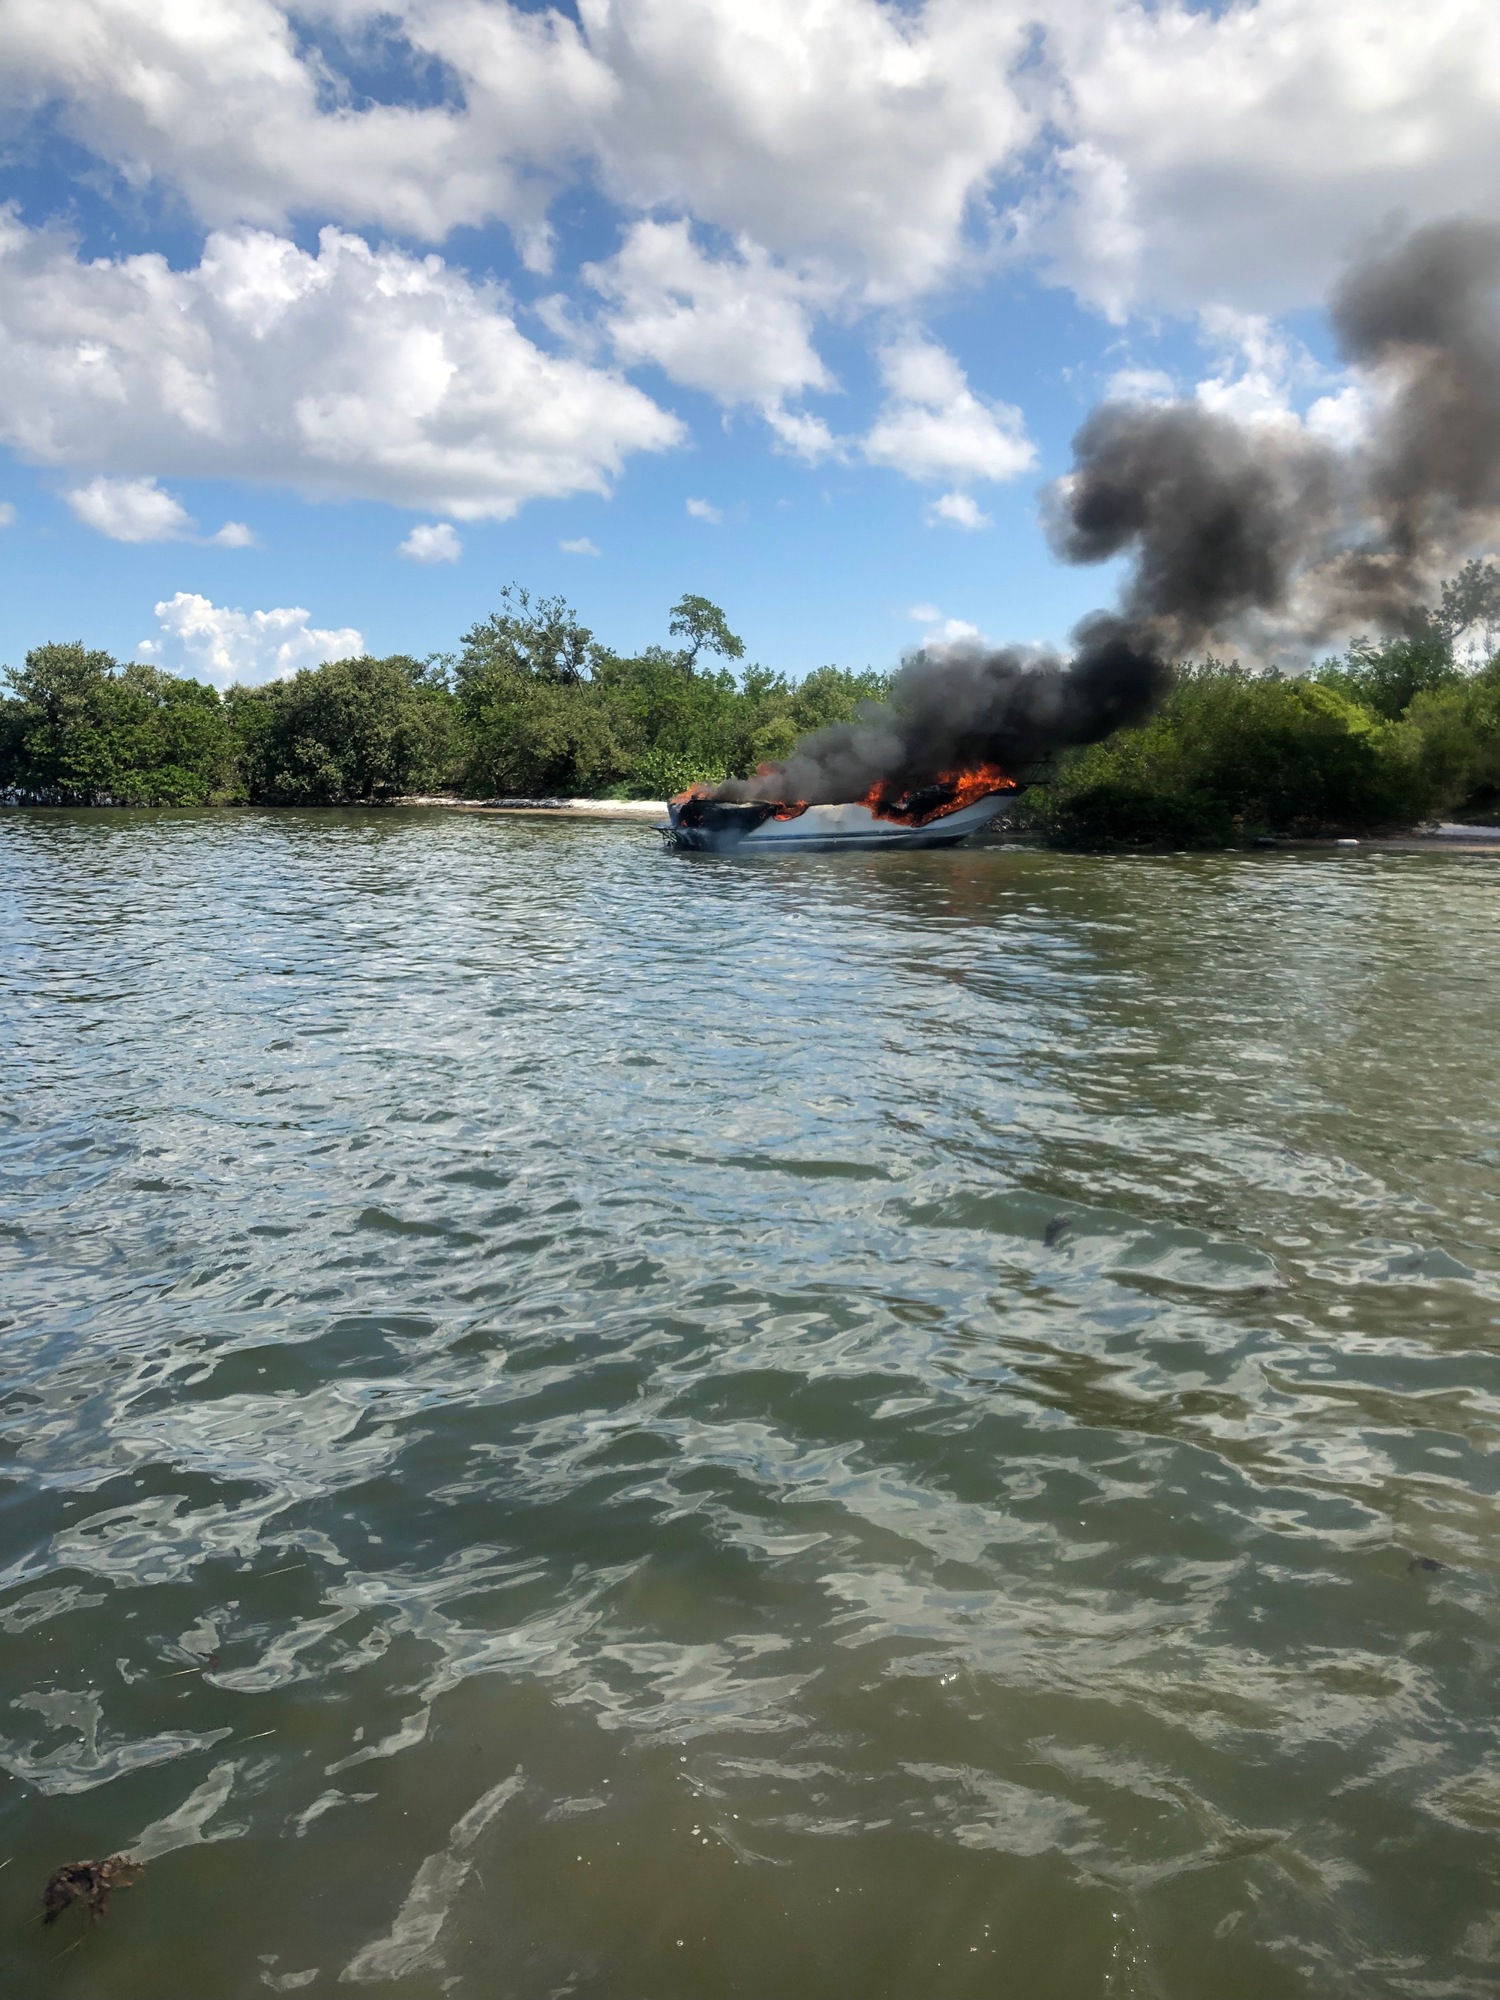 Photos taken by Manatee County Sheriff's Office deputies on scene on June 4, 2019. All photos courtesy of MCSO.